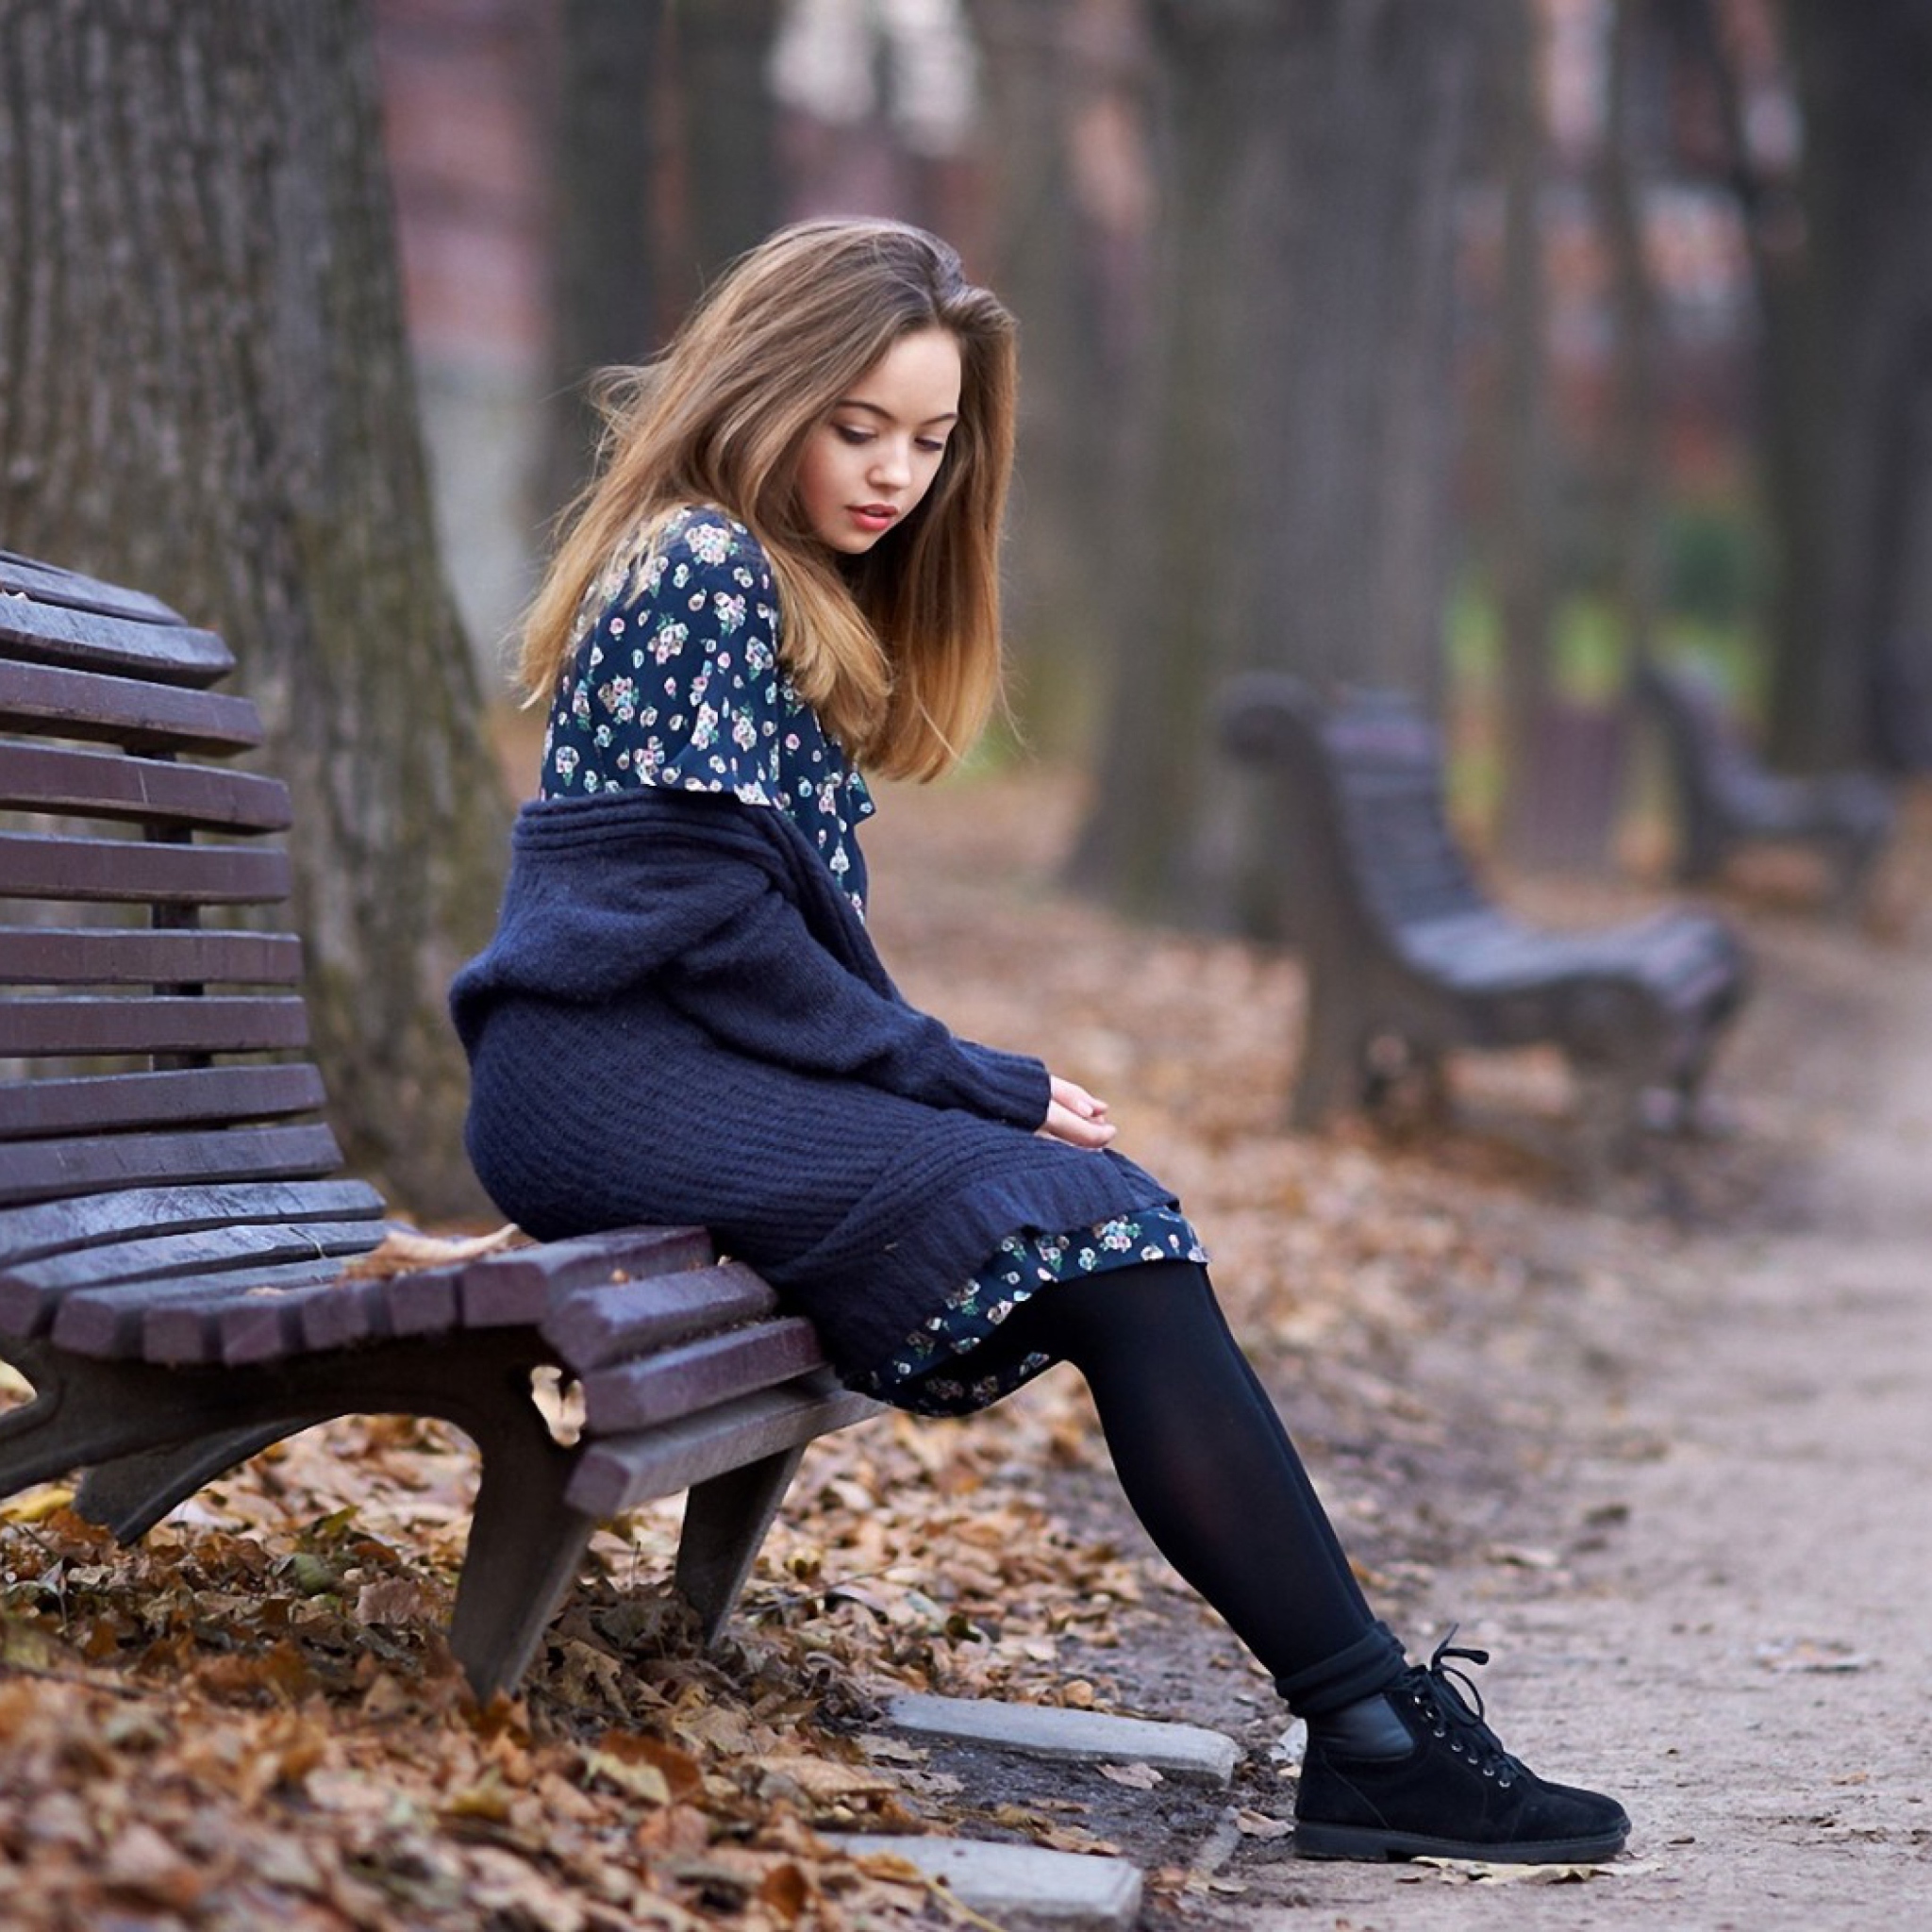 Beautiful Girl Sitting On Bench In Autumn Park wallpaper 2048x2048